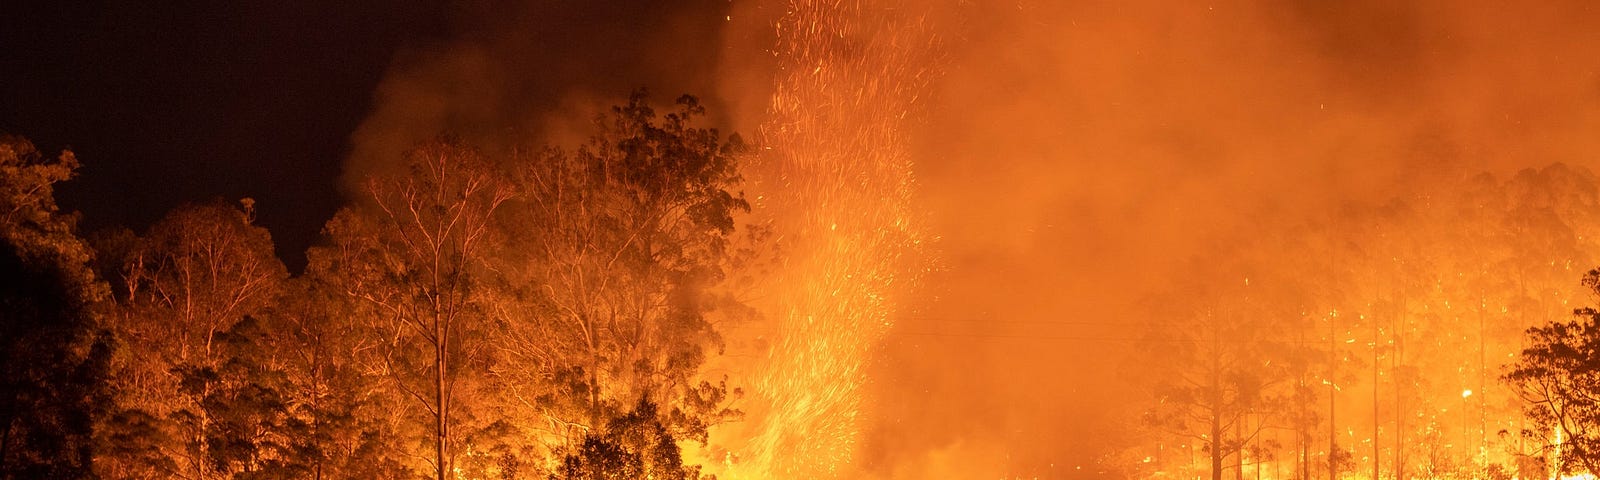 An out-of-control fire in Hillville New South Wales on 12 November 2019 / Matthew Abbott New York Times